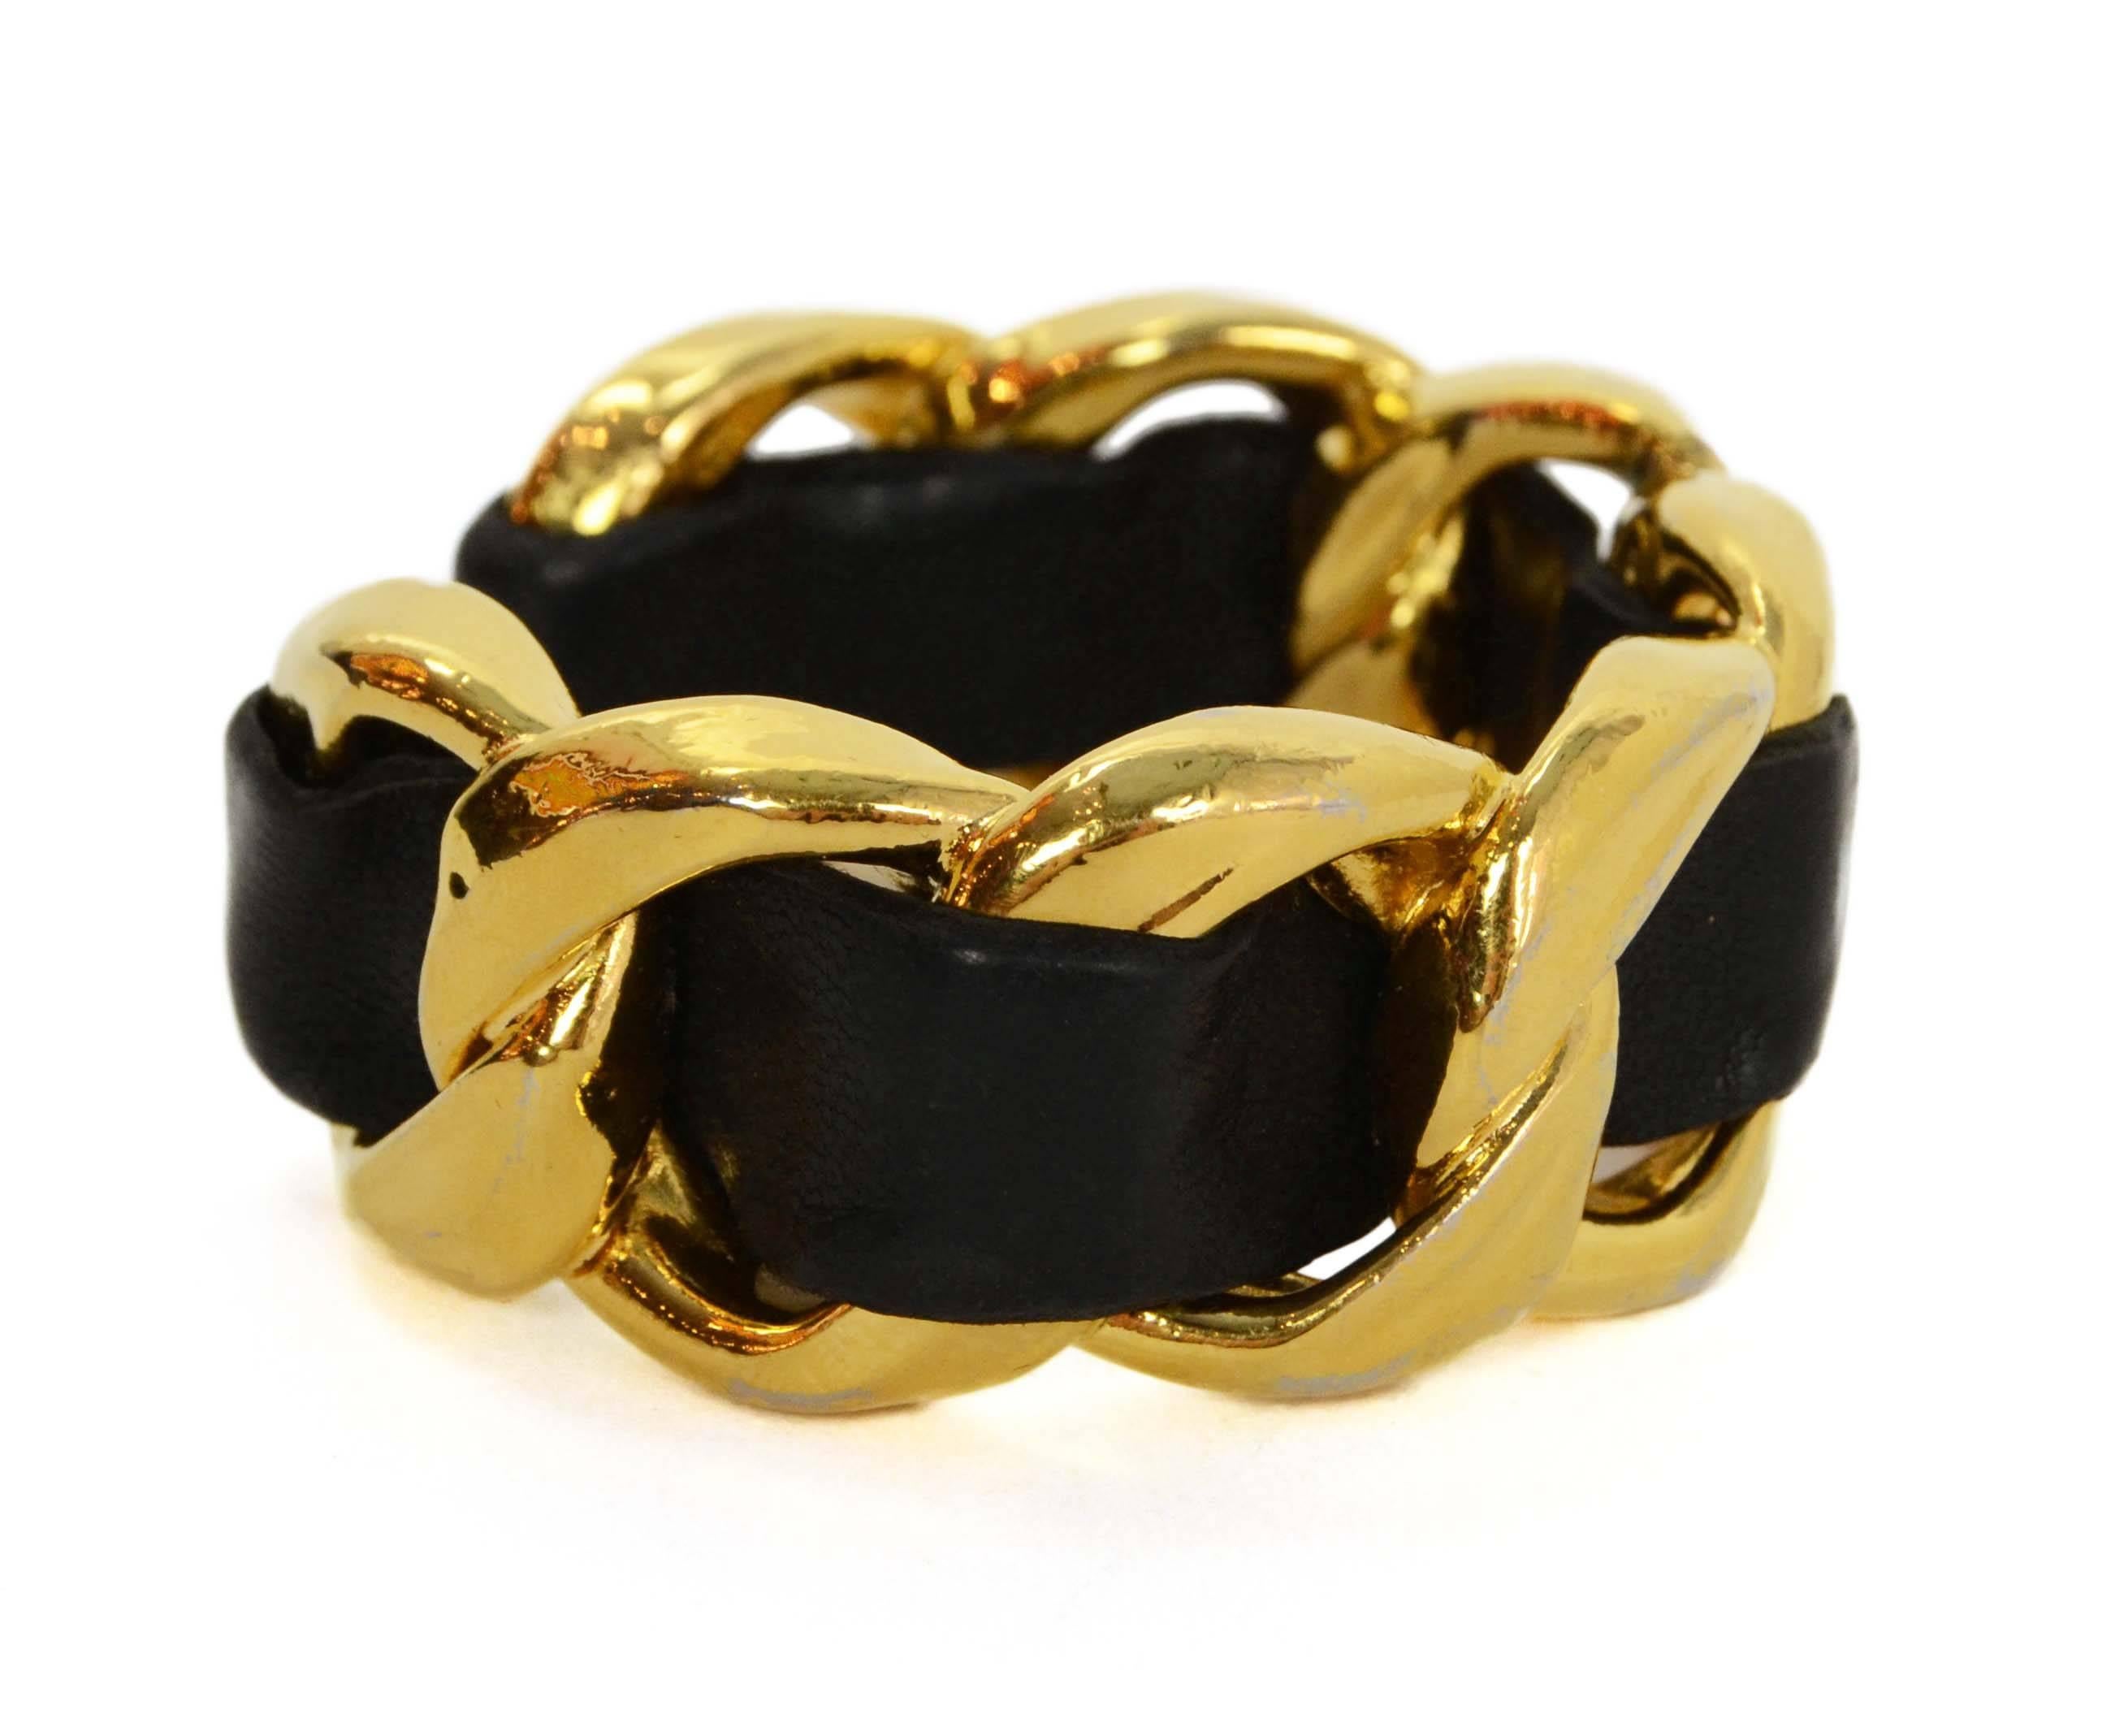 Chanel Vintage '86 Black Leather Woven Chain Link Cuff 
Made In: France
Year of Production: 1986
Color: Black and goldtone
Materials: Leather and metal
Closure: None
Stamp: 2 CC 3
Overall Condition: Excellent vintage, pre-owned